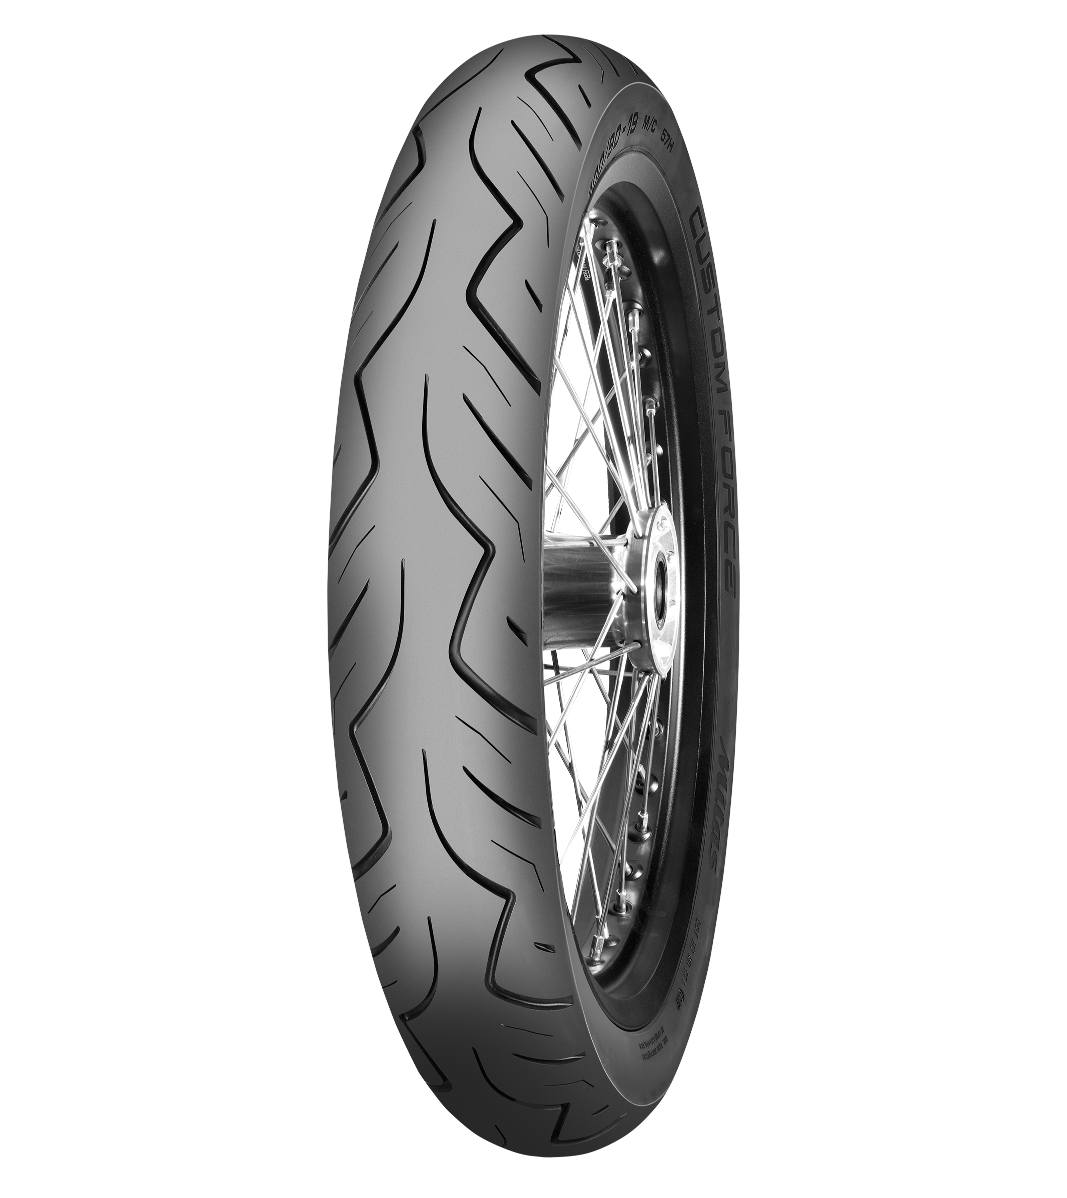 Mitas CUSTOM FORCE 100/90-19 (MM90-19) Motorcycle Custom On-Road 57H No Stripe Tubeless Front Tire, 590490, 100/90-19, Custom, Custom Force, Front, Motorcycle Custom, On-Road, Tires - Imported and distributed in North & South America by Lindeco Genuine Powersports - Premier Powersports Equipment and Accessories for Motorcycle Enthusiasts, Professional Riders and Dealers.